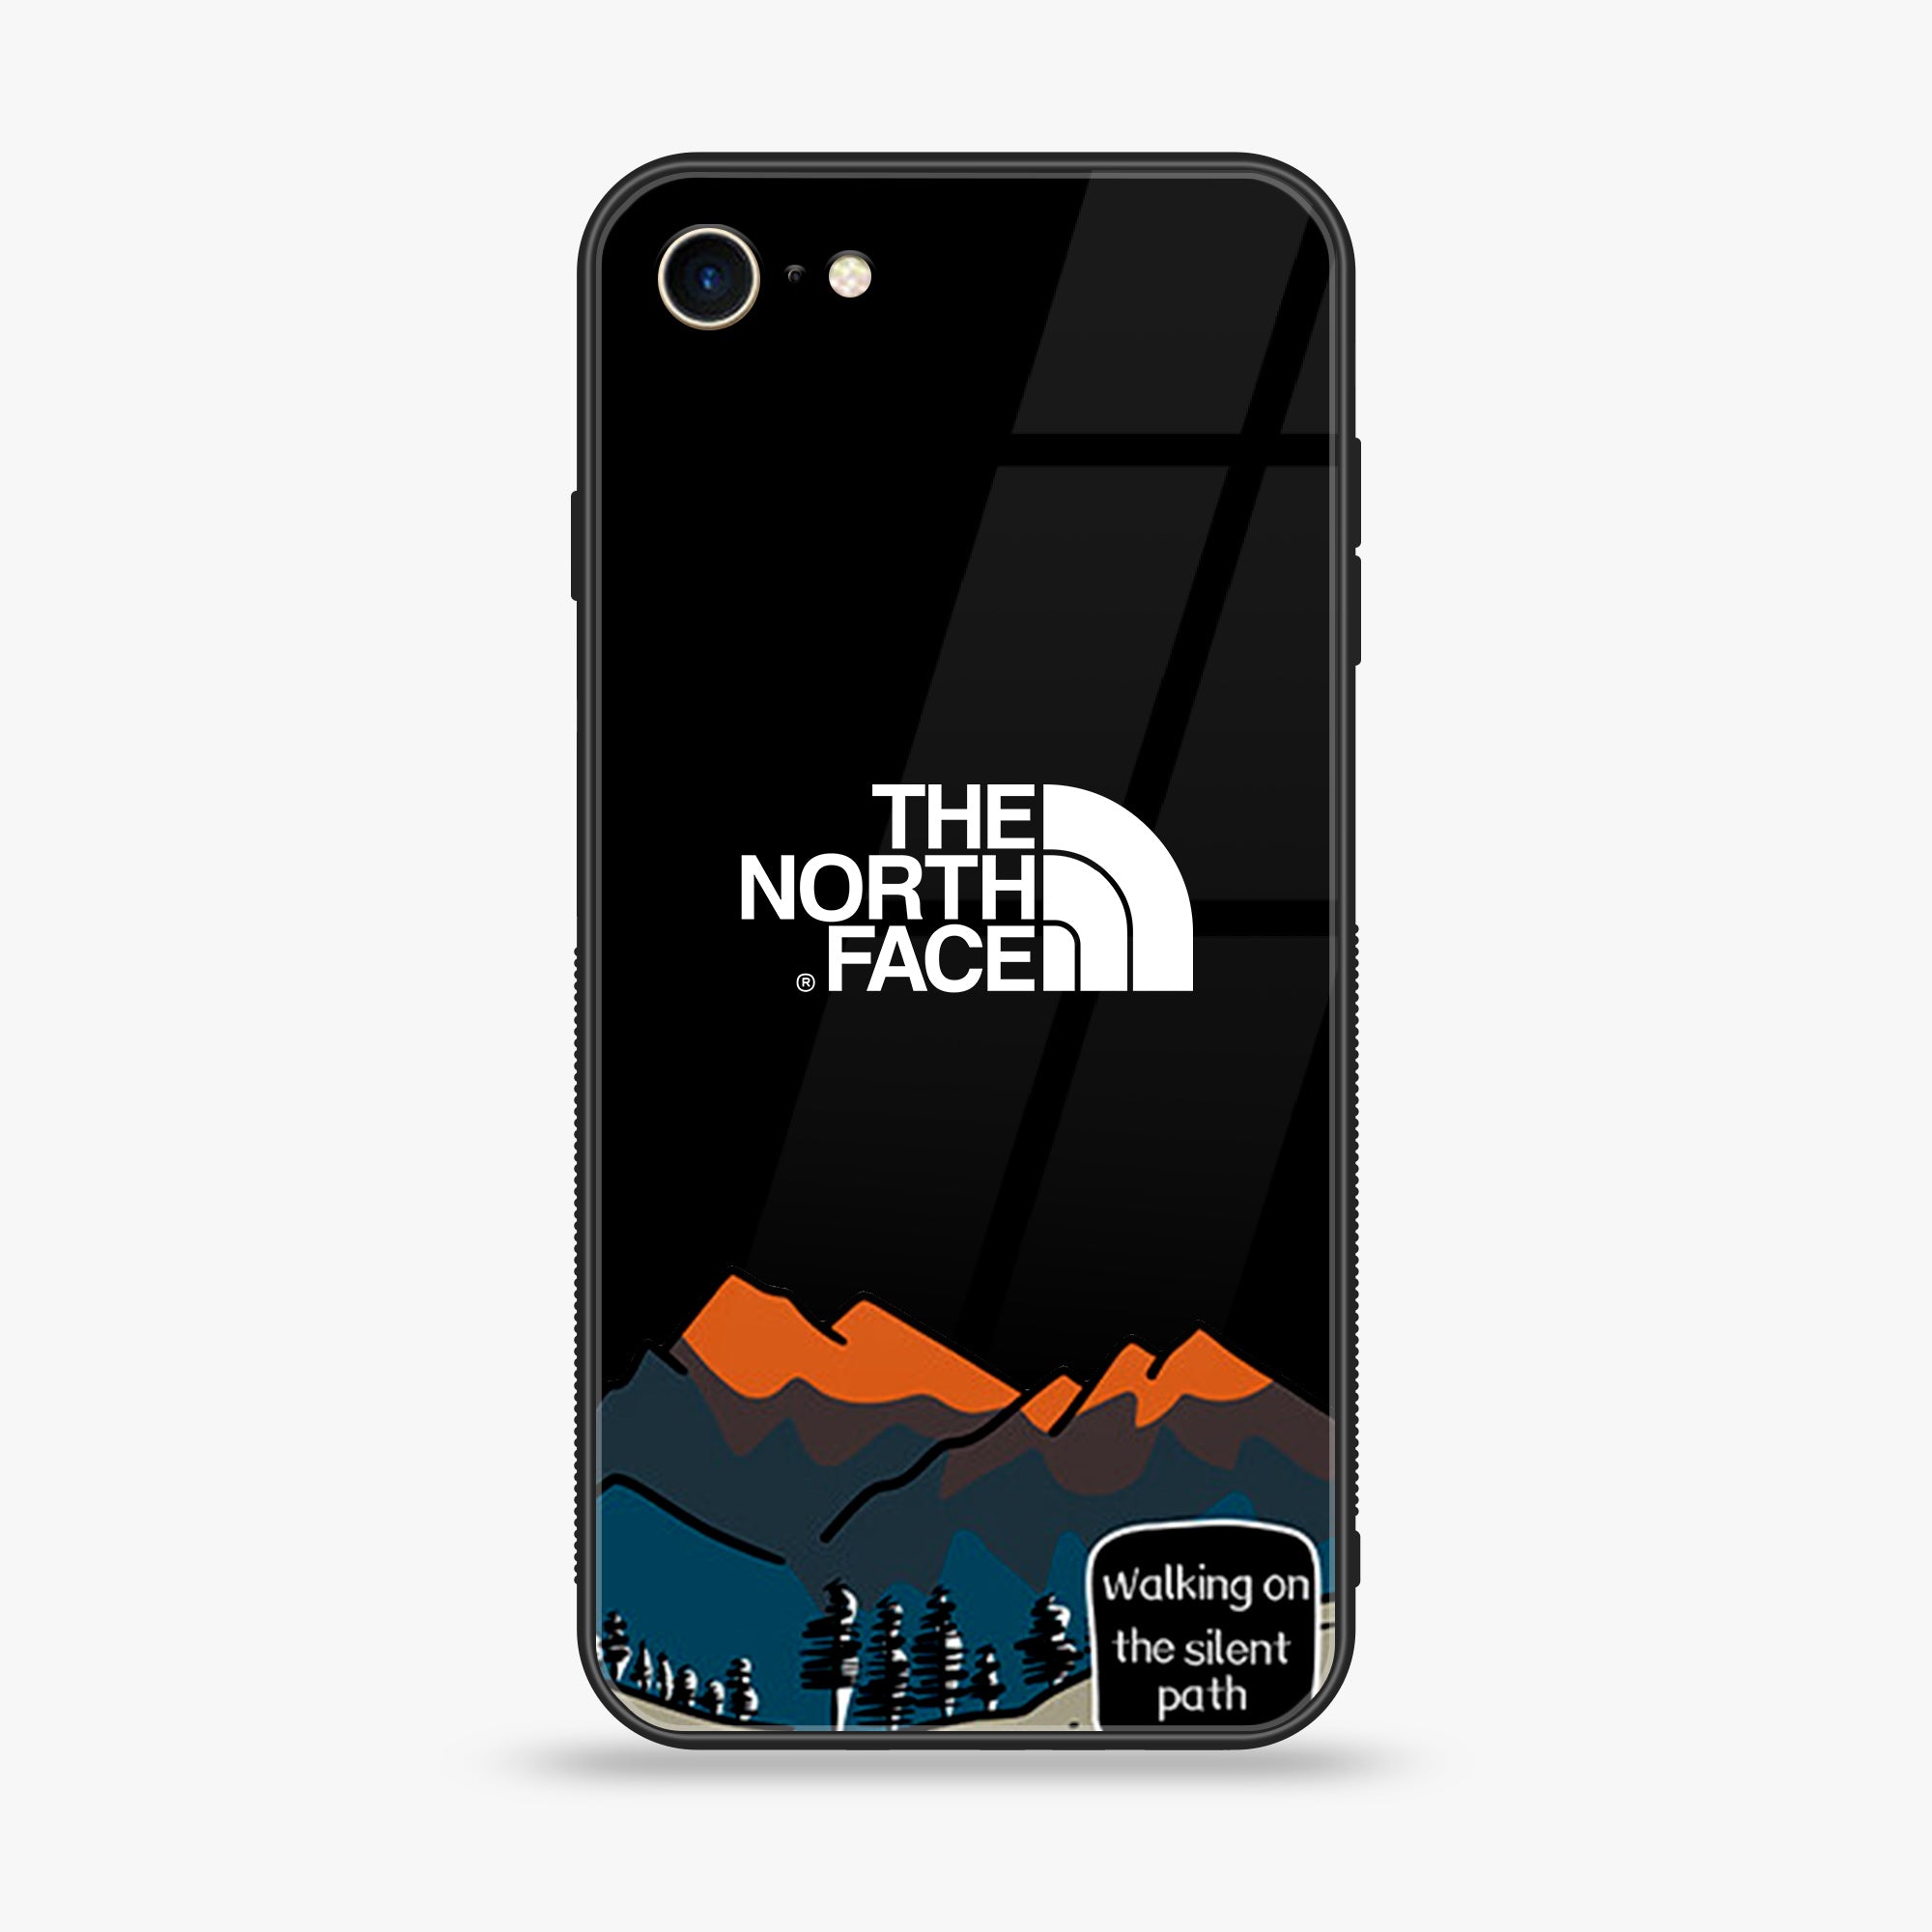 iPhone 7 - The North Face Series - Premium Printed Glass soft Bumper shock Proof Case